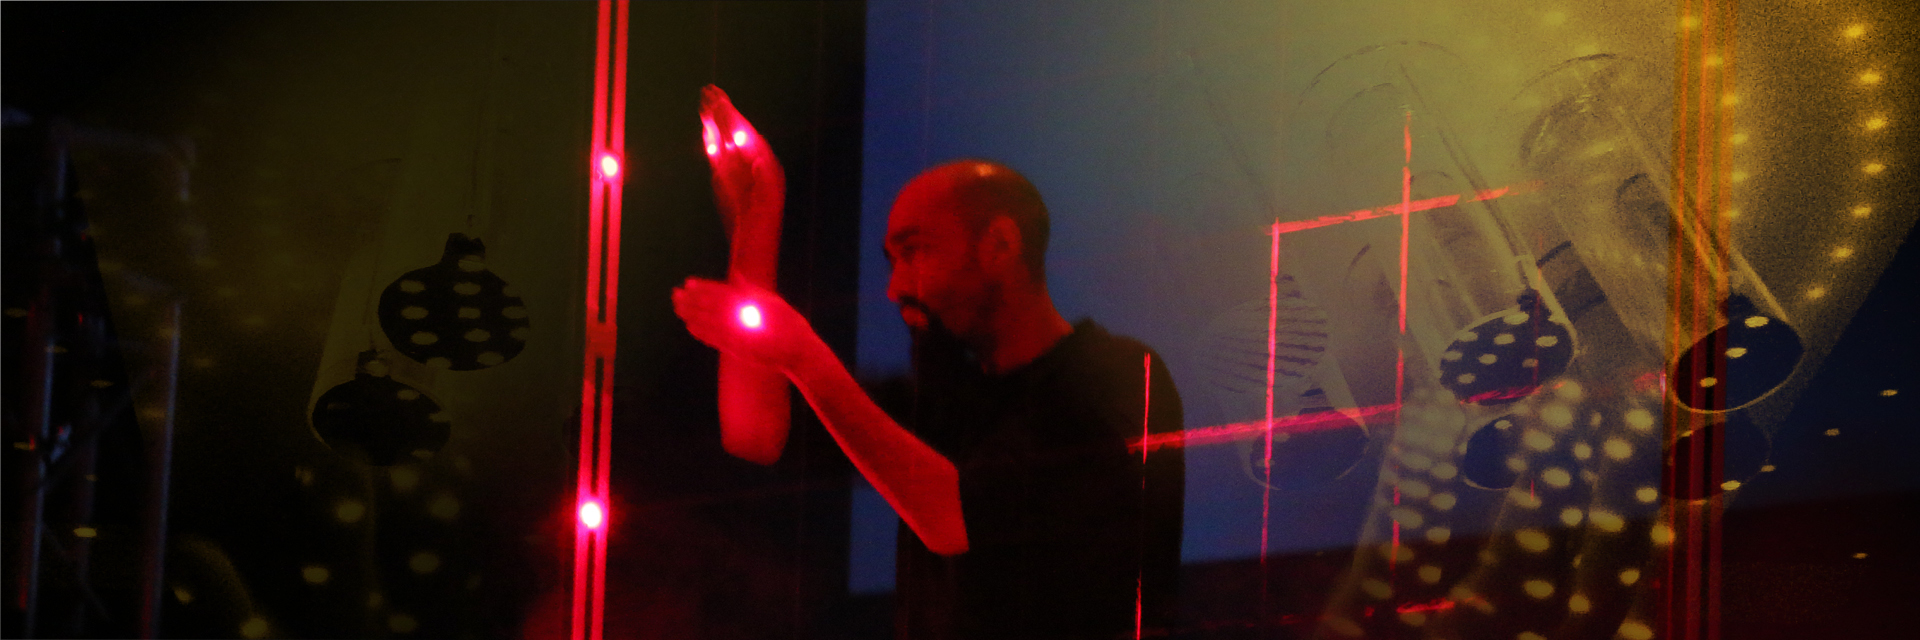 A man playing a set of criss-crossing red lasers within a square frame like a stringed instrument.